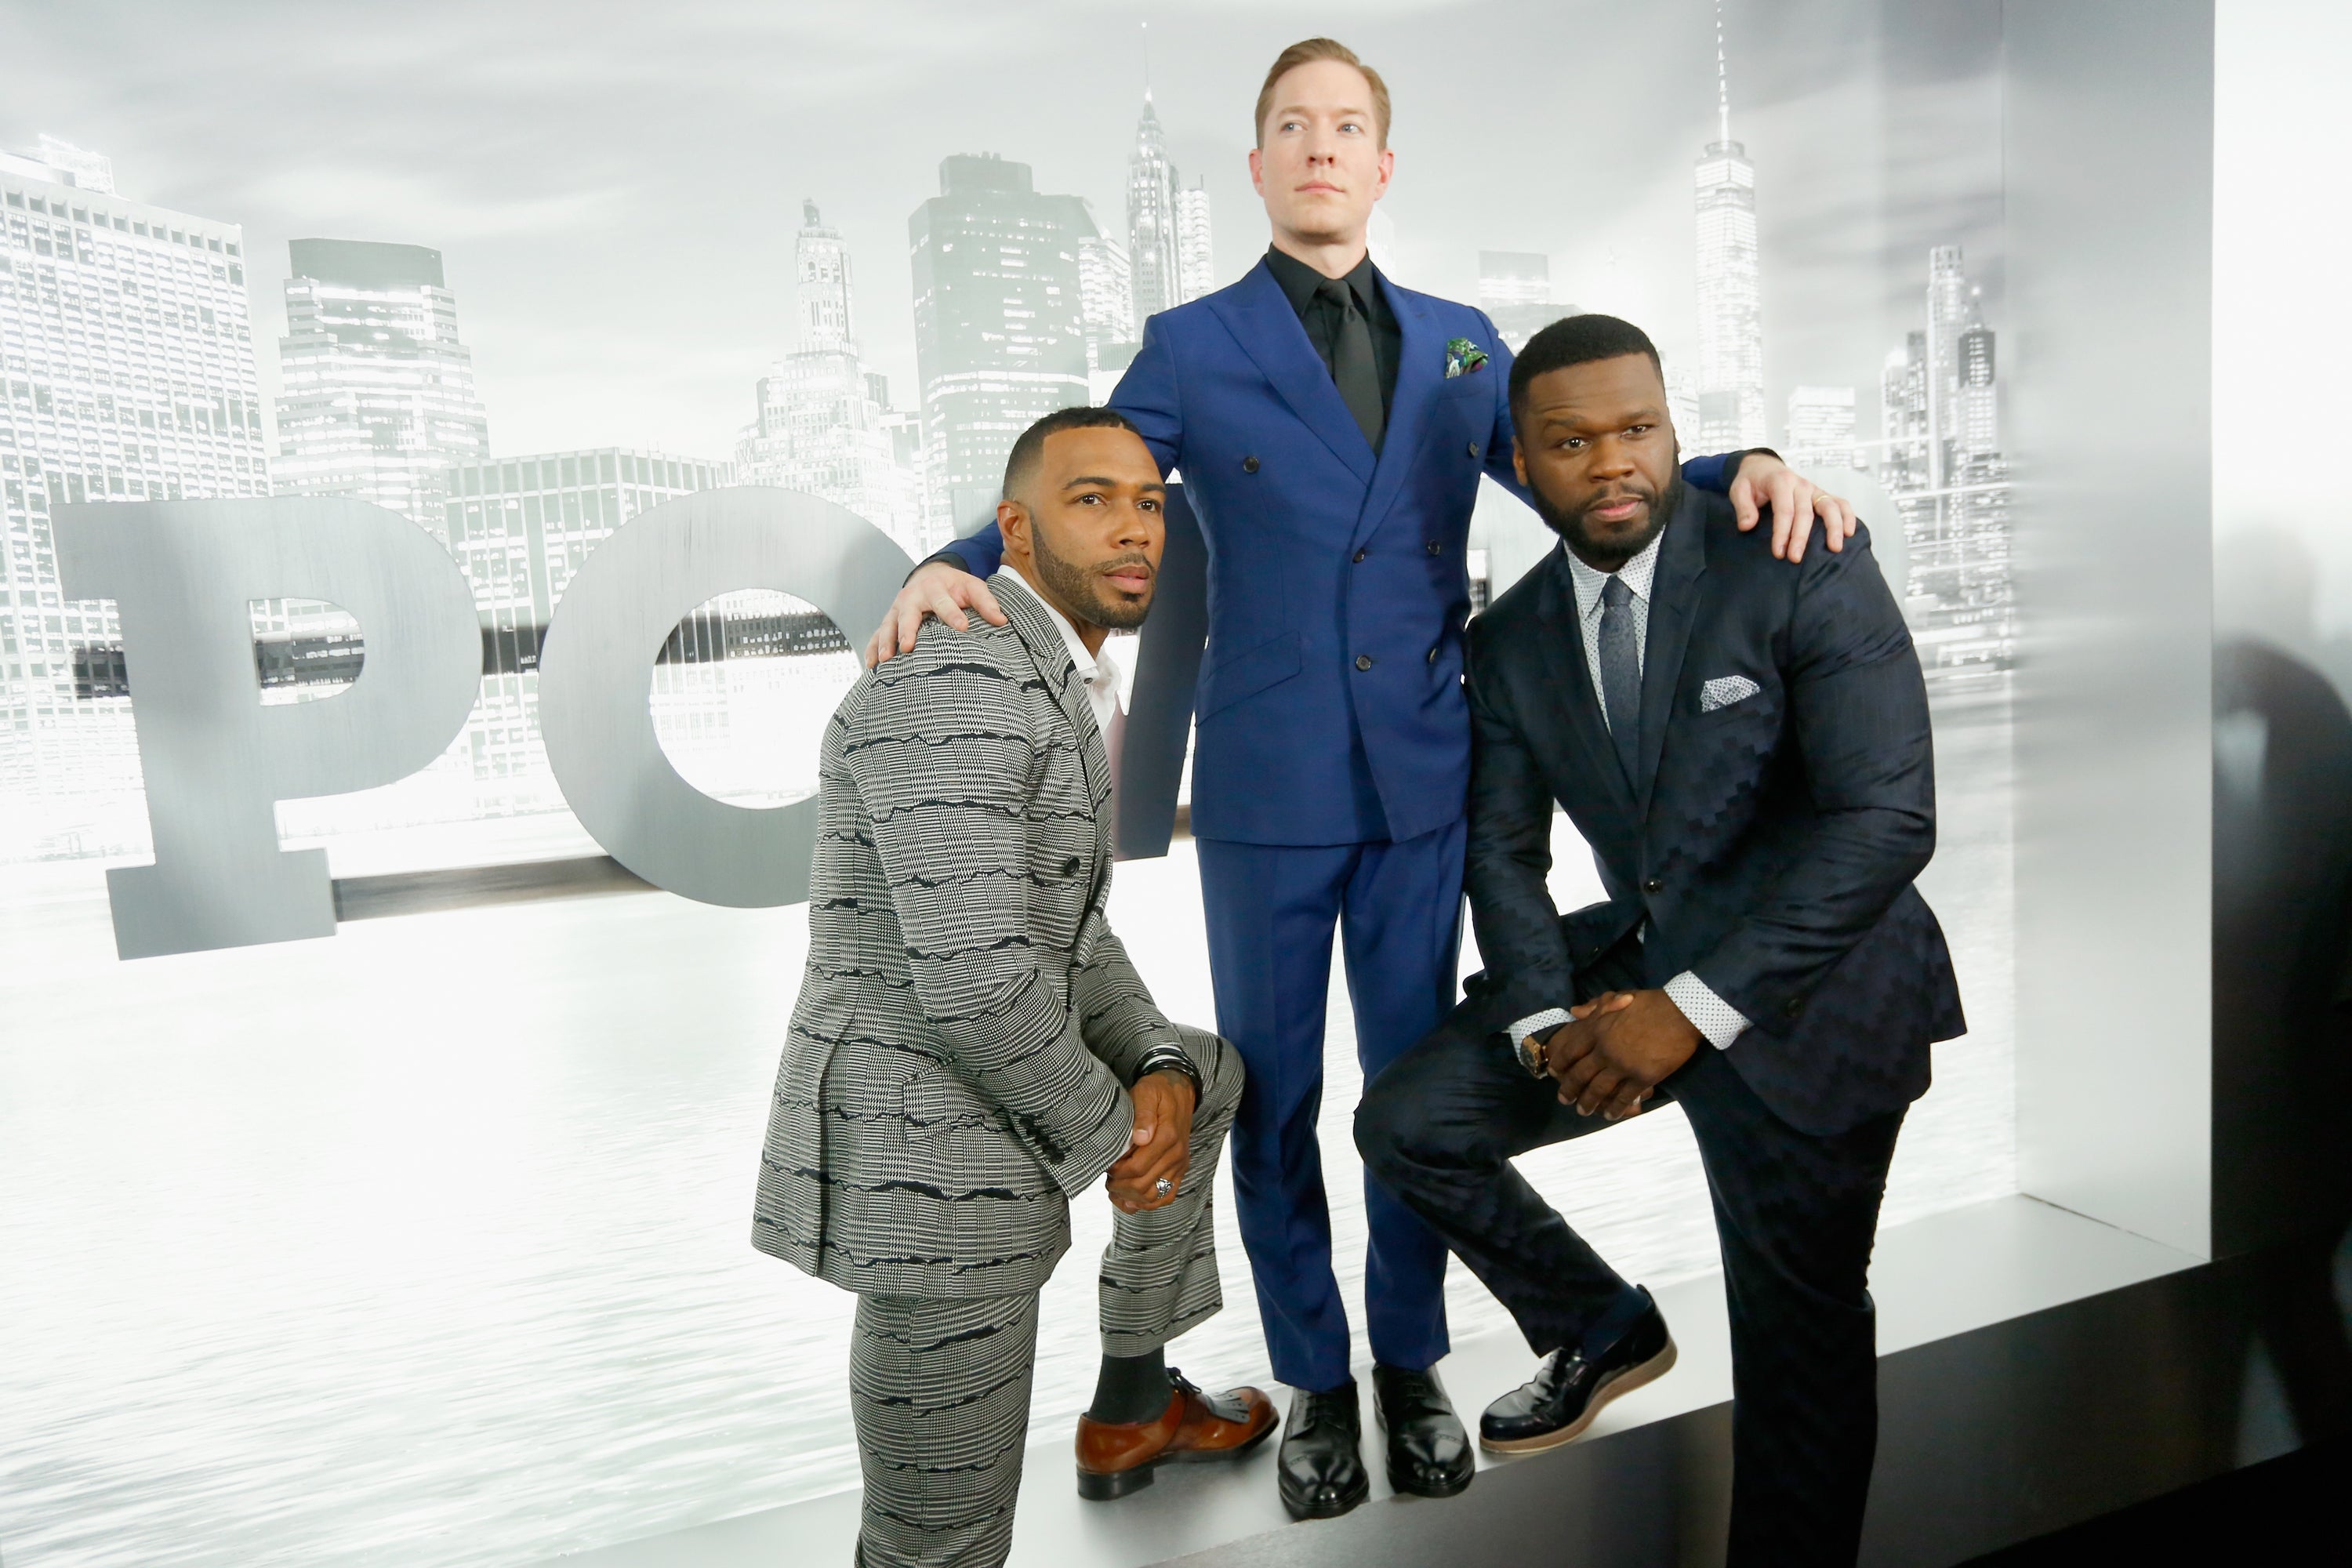 Eye Candy: We Appreciate All The Fine Men Of The 'Power' Cast